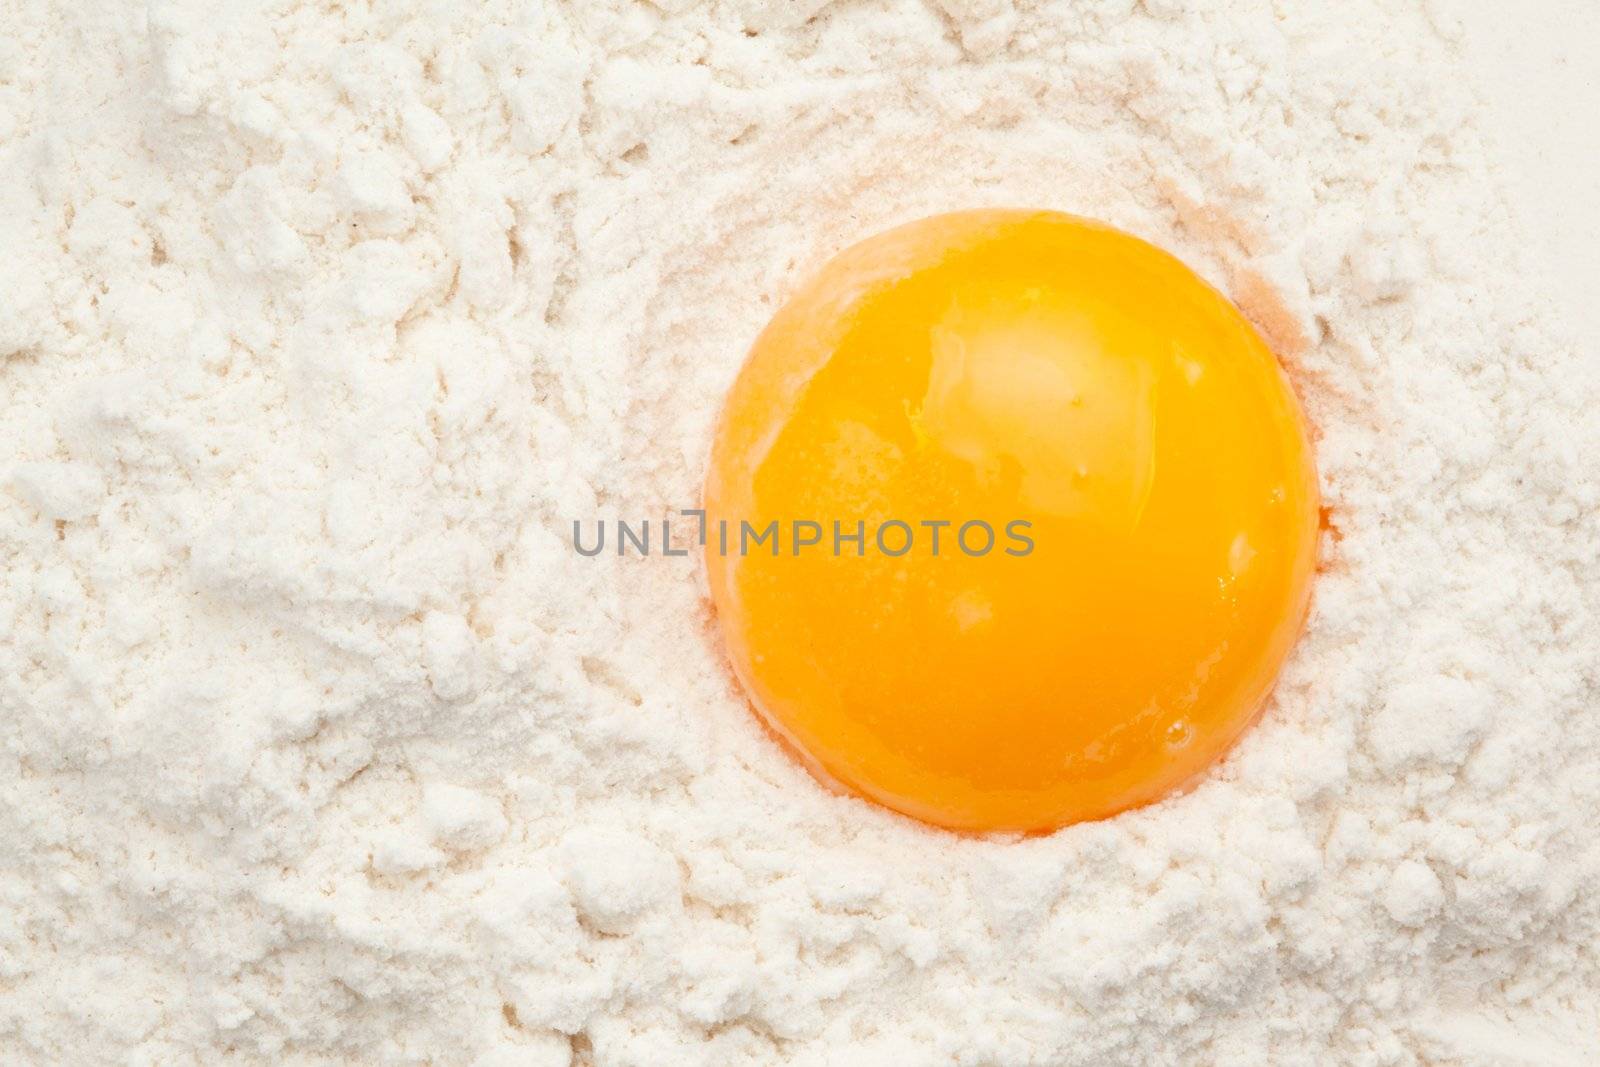 Egg yolk on the flour in a high angle view